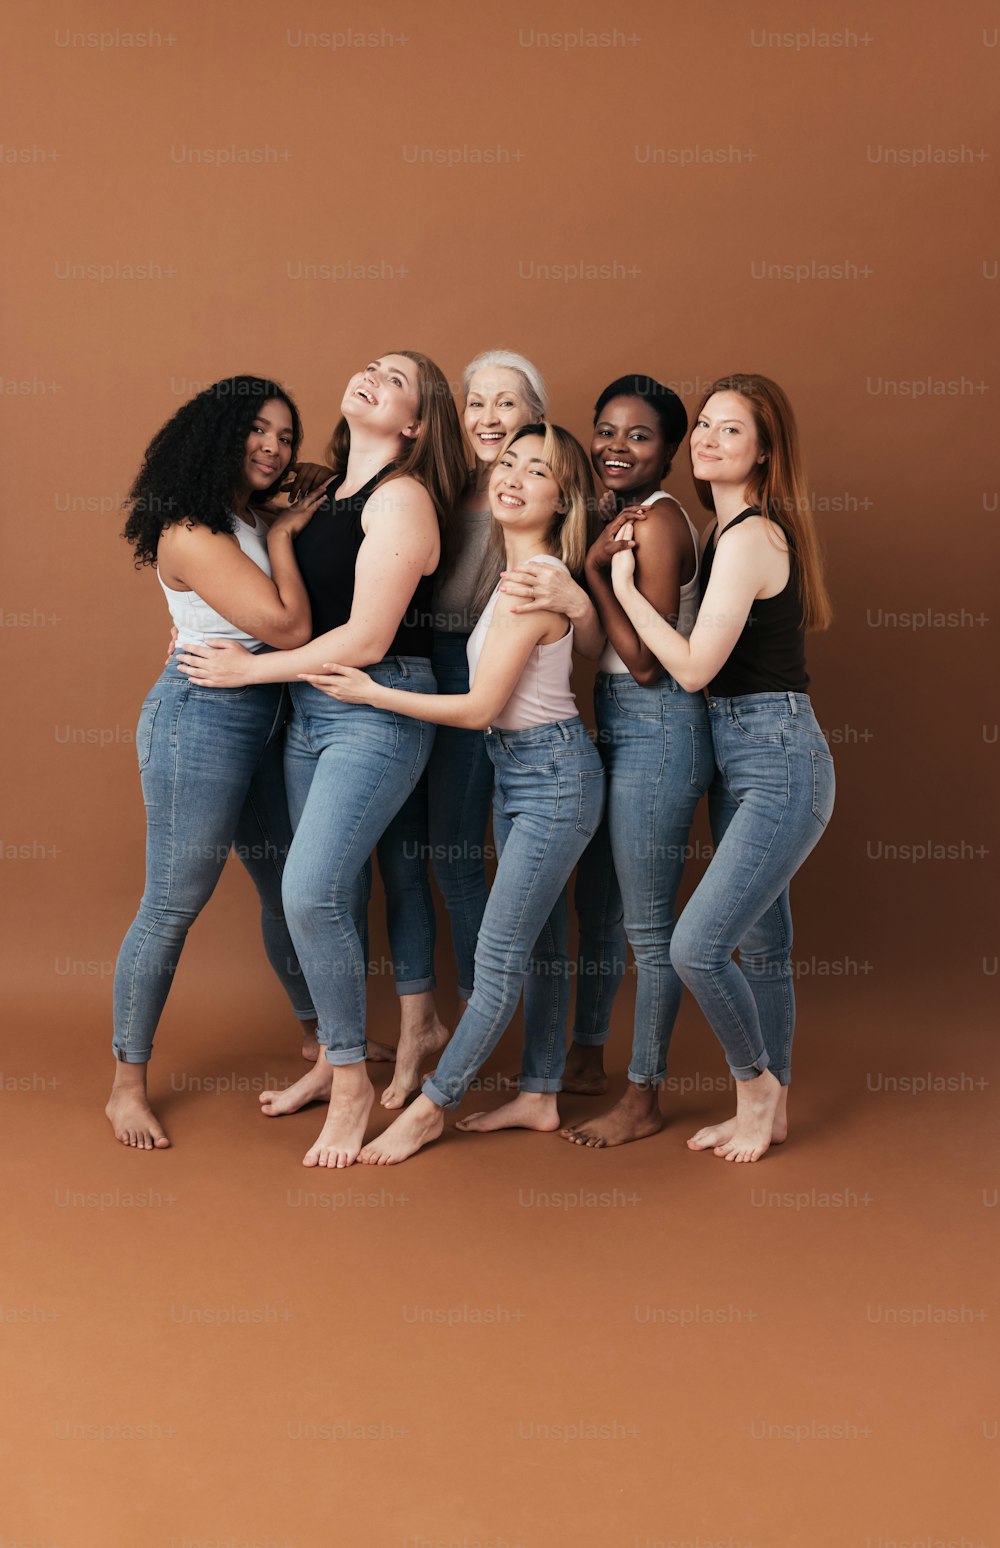 Group of cheerful women of different body type and ages standing together in a studio